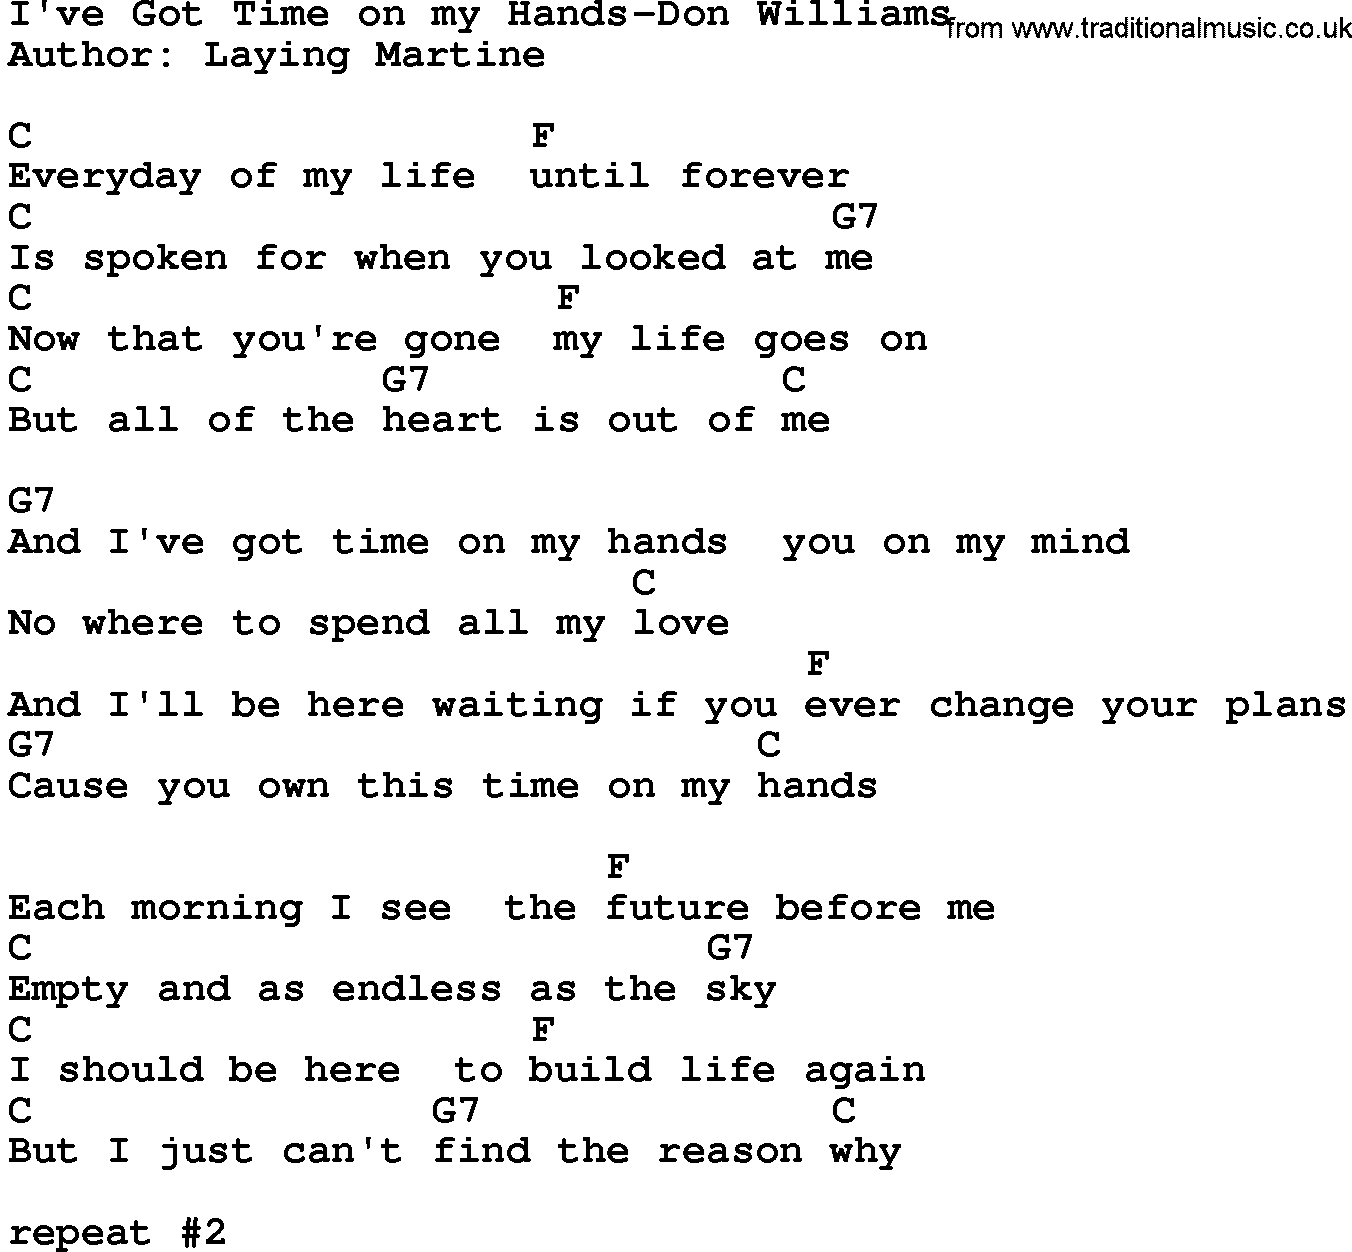 Country music song: I've Got Time On My Hands-Don Williams lyrics and chords